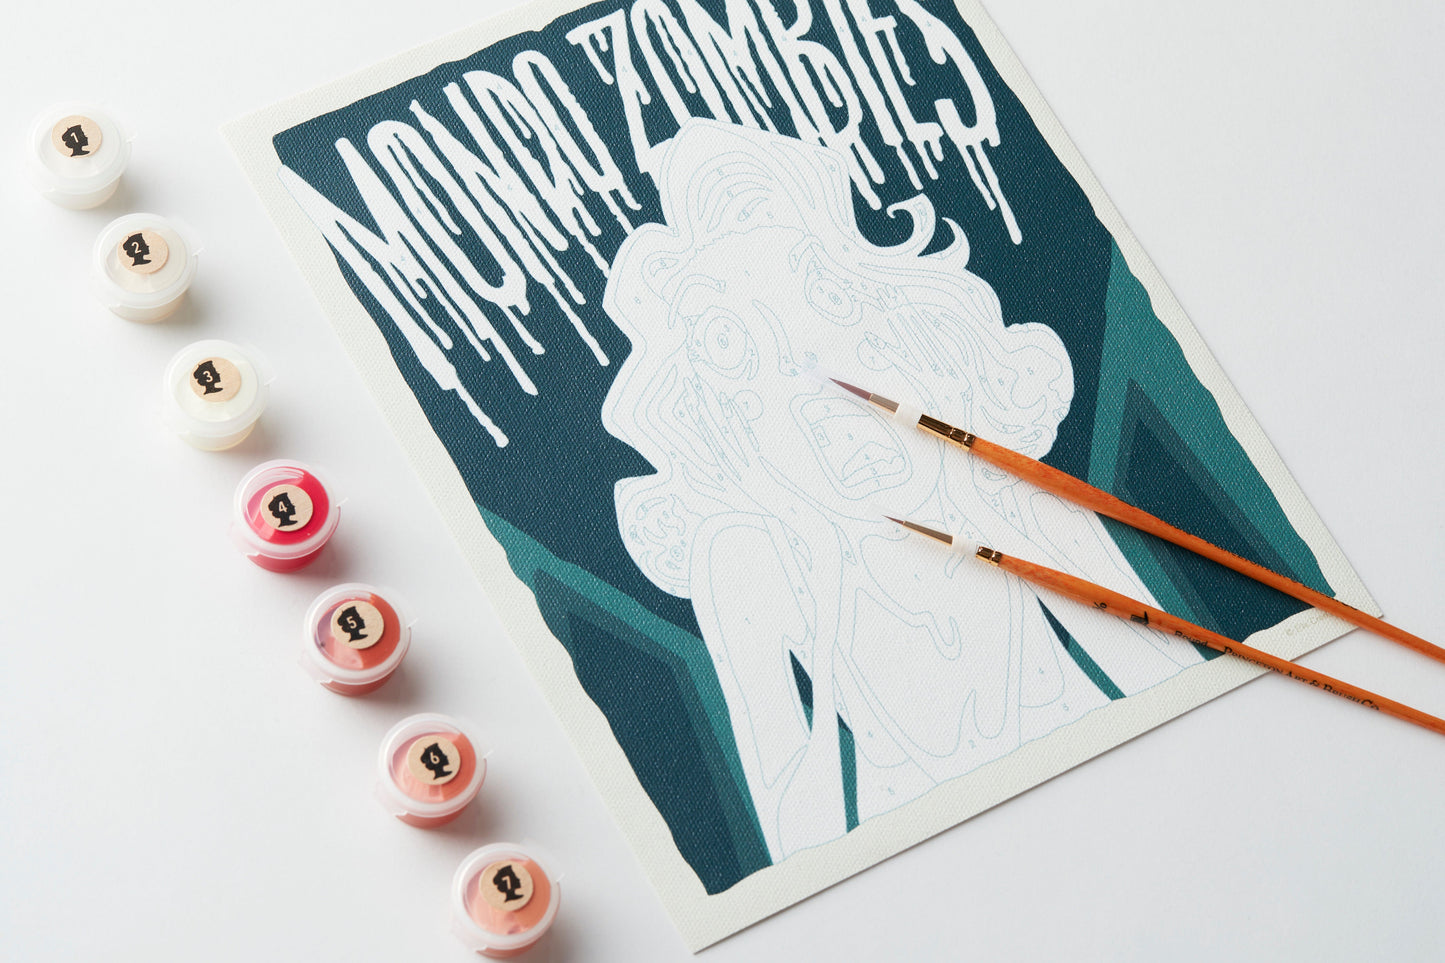 ParaNorman Mondo Zombies Paint-by-Number Kit